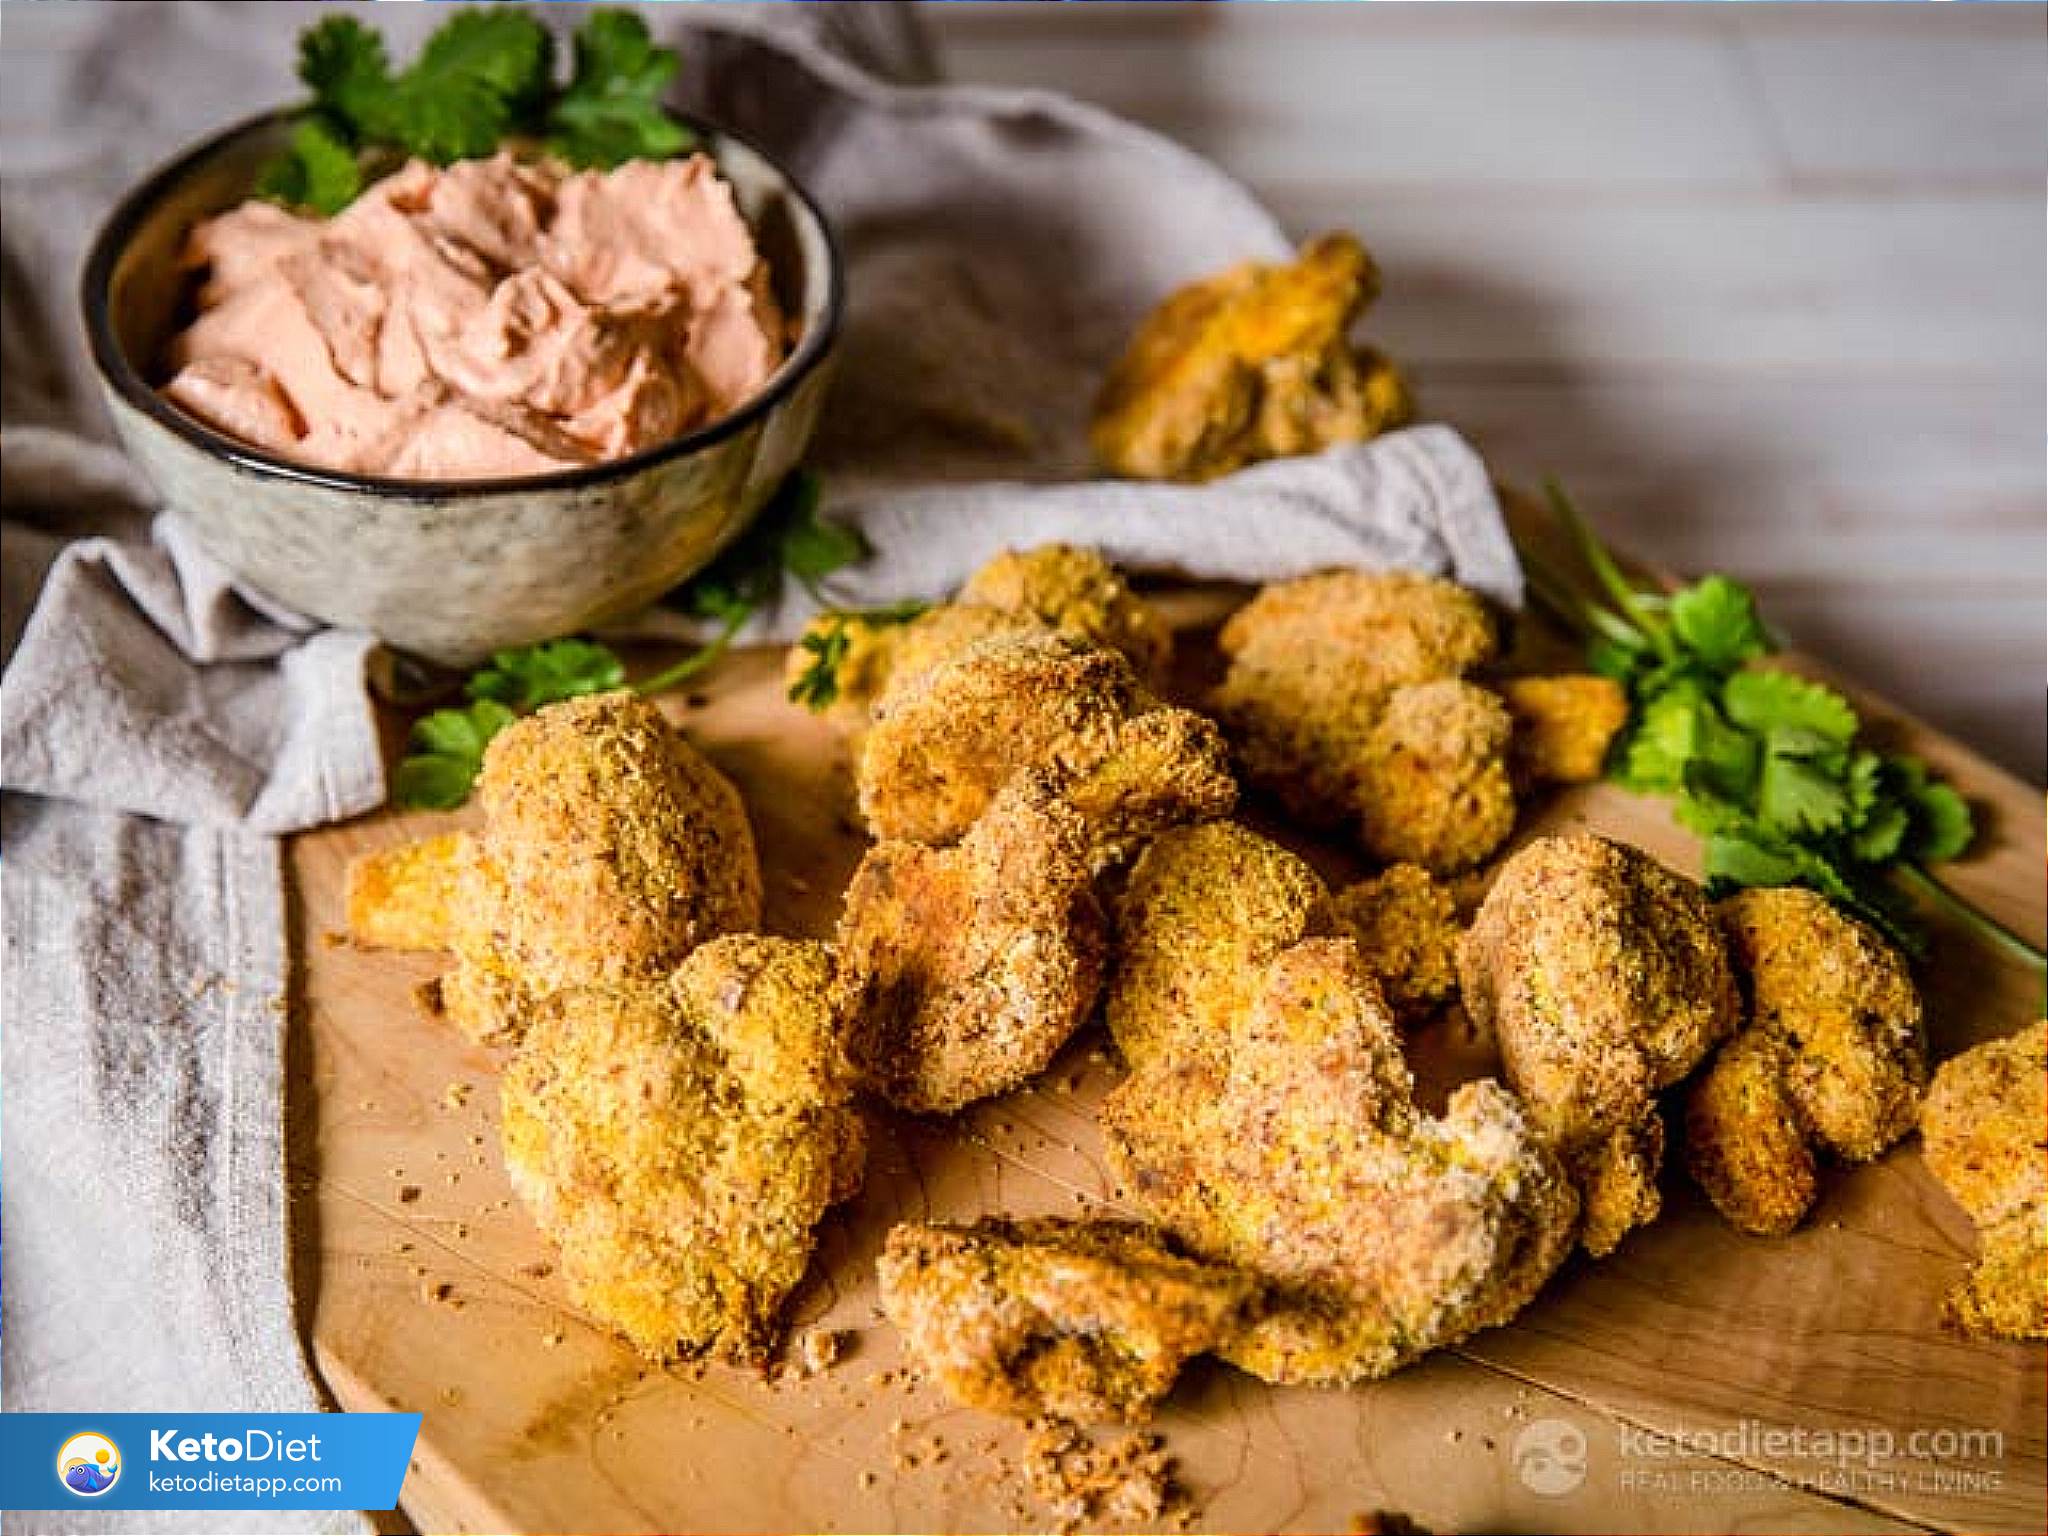 Low-Carb Golden Crumbed Cauliflower